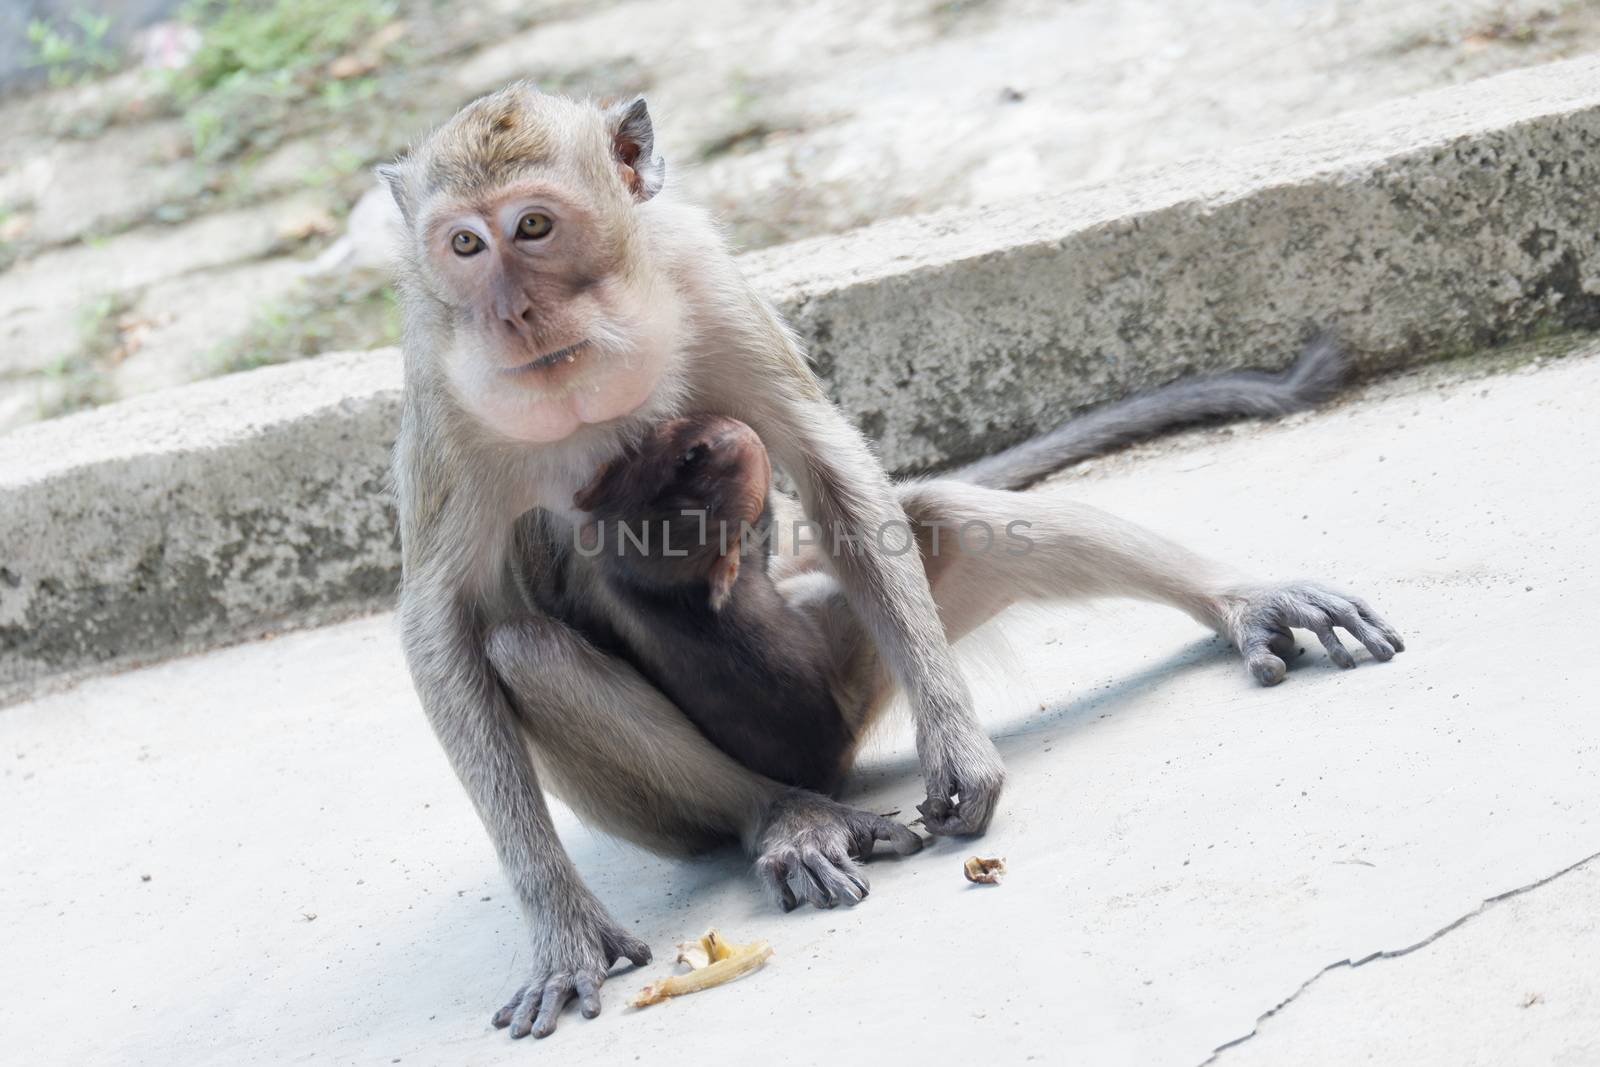 Macaca fascicularis is a small-bodied long-tailed monkey native to Southeast Asia, used for medical experiments. The color of the hair on his body is gray brown. The babies are blackish in color.